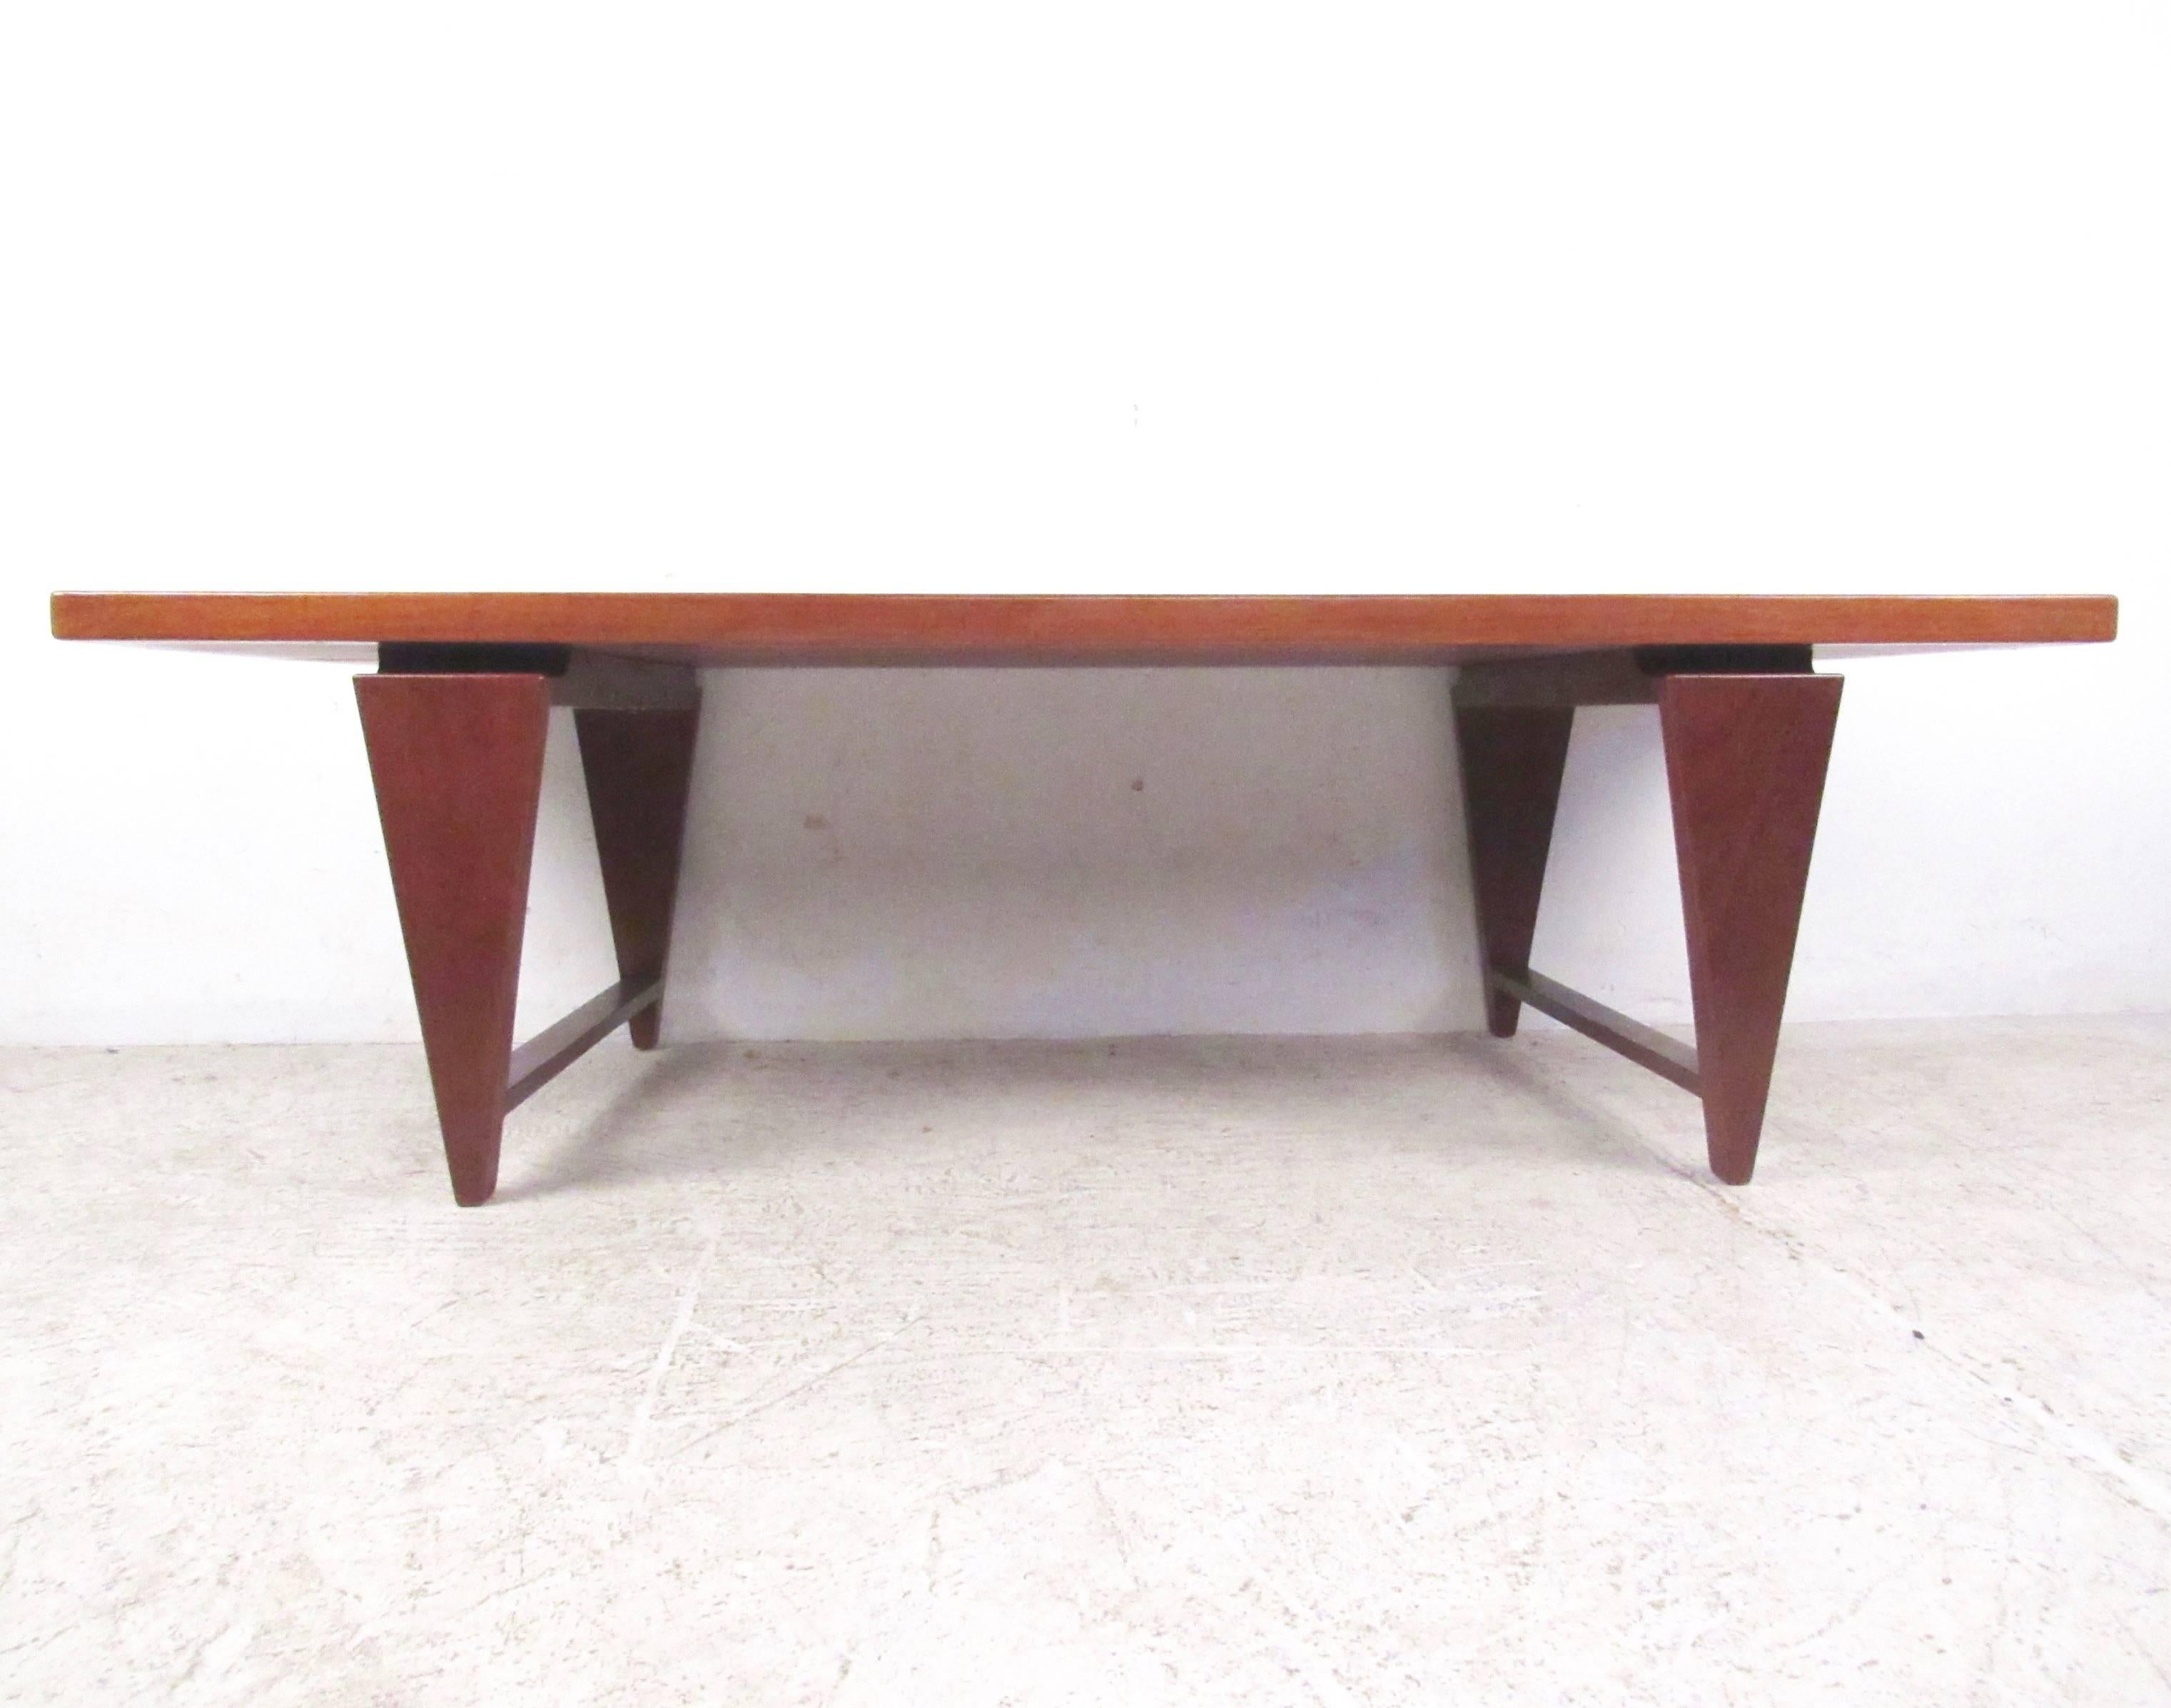 This unique vintage modern coffee table boasts triangular legs connected by stretchers ensuring maximum sturdiness. A sleek design by Illum Wikkelso with a large rectangular table top and elegant teak wood grain throughout. This well constructed